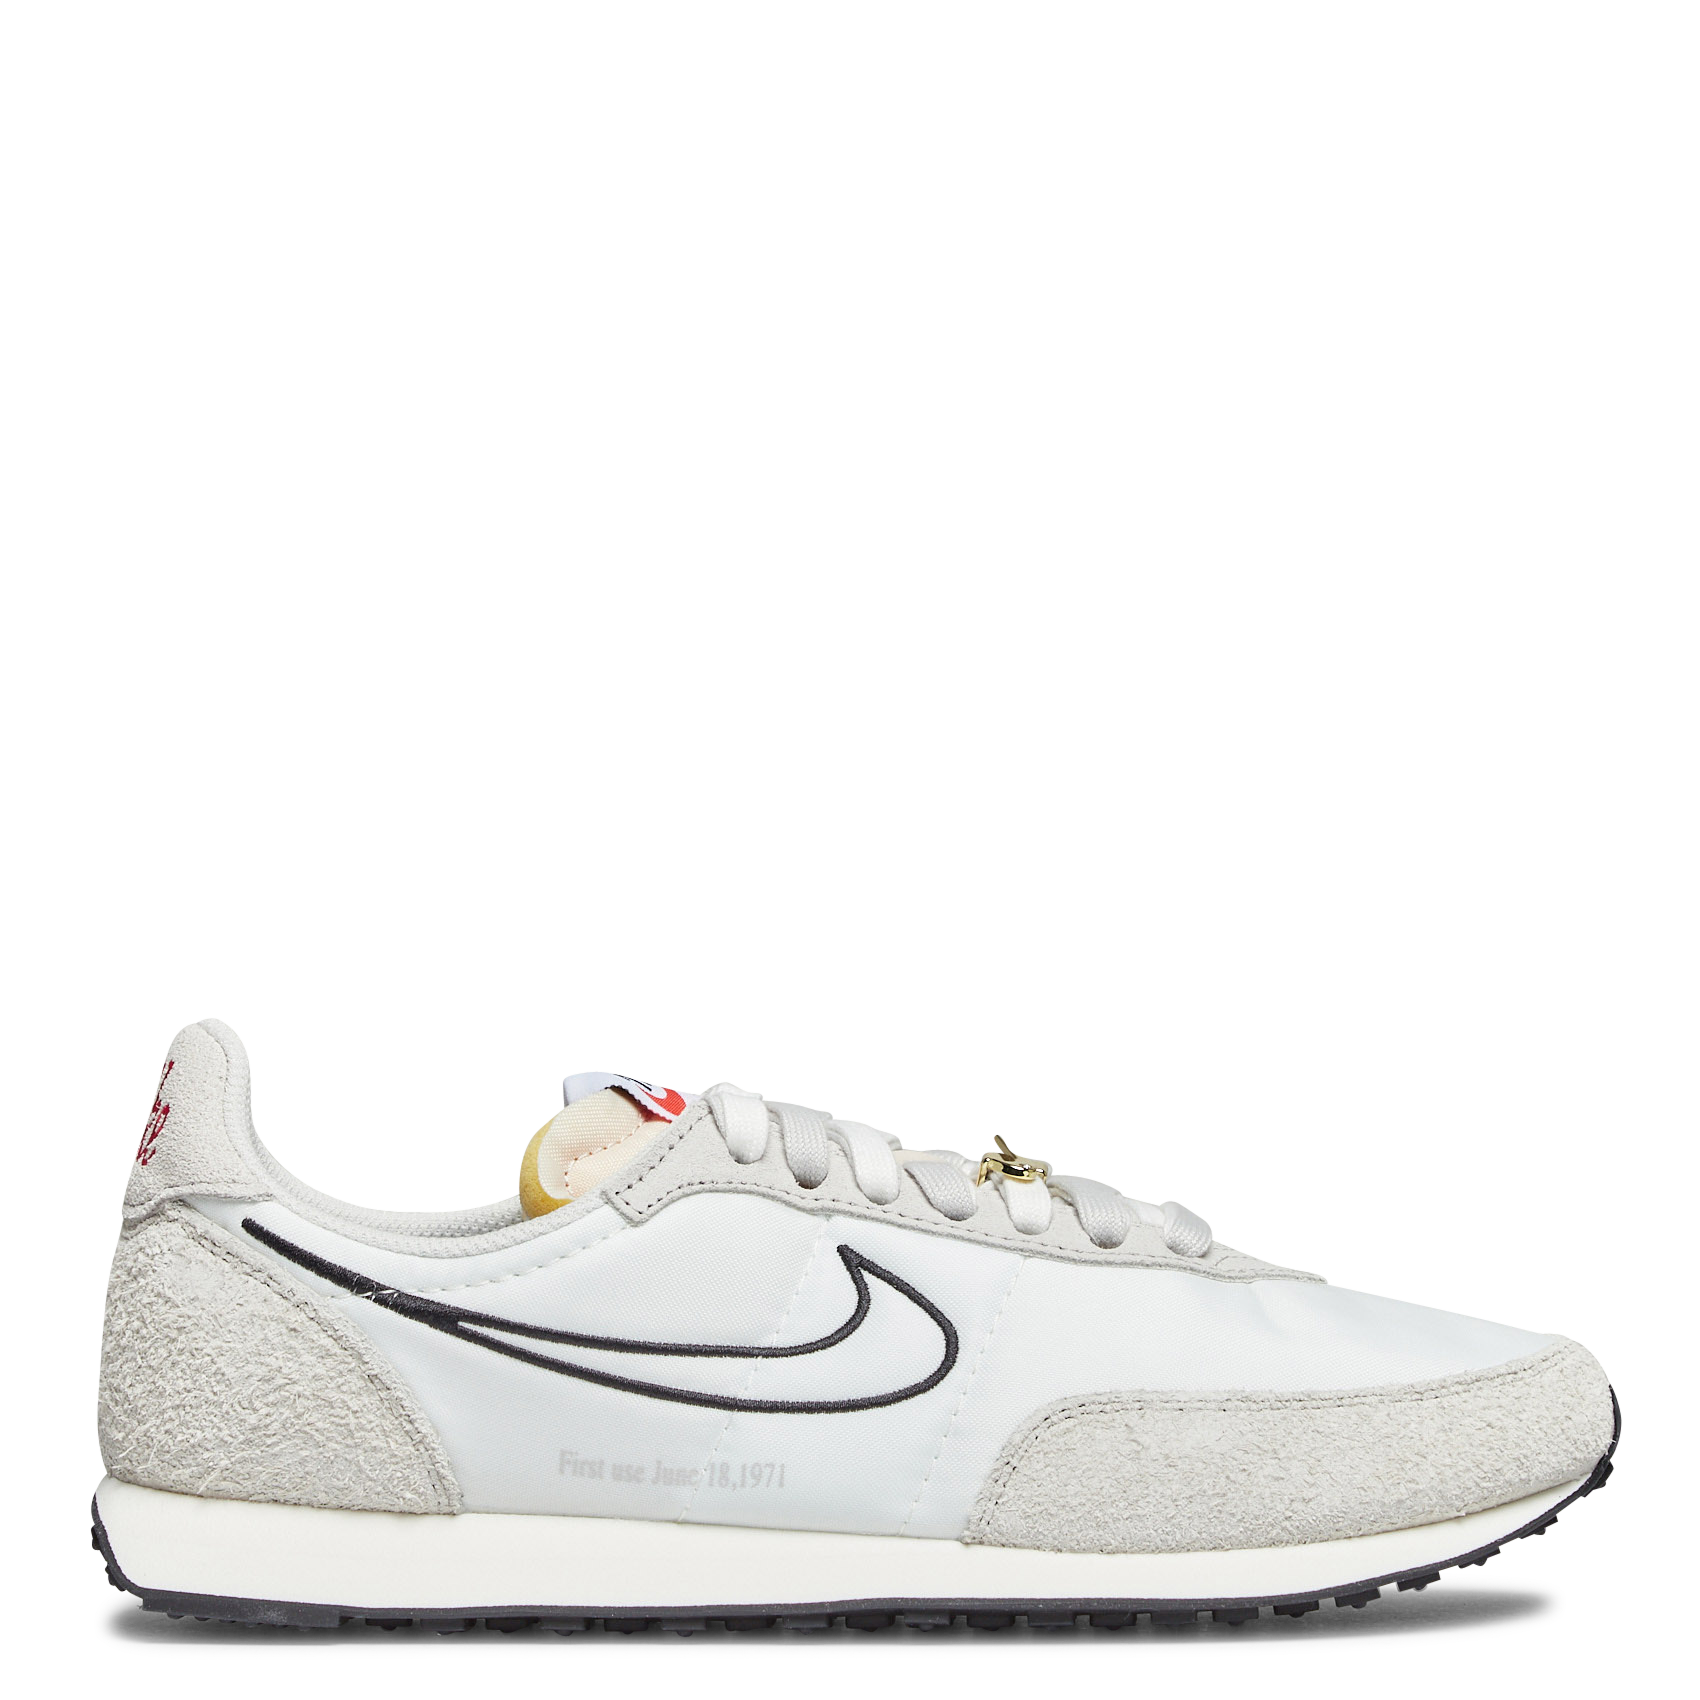 Nike Waffle Trainer 2 Sneakers Sail 